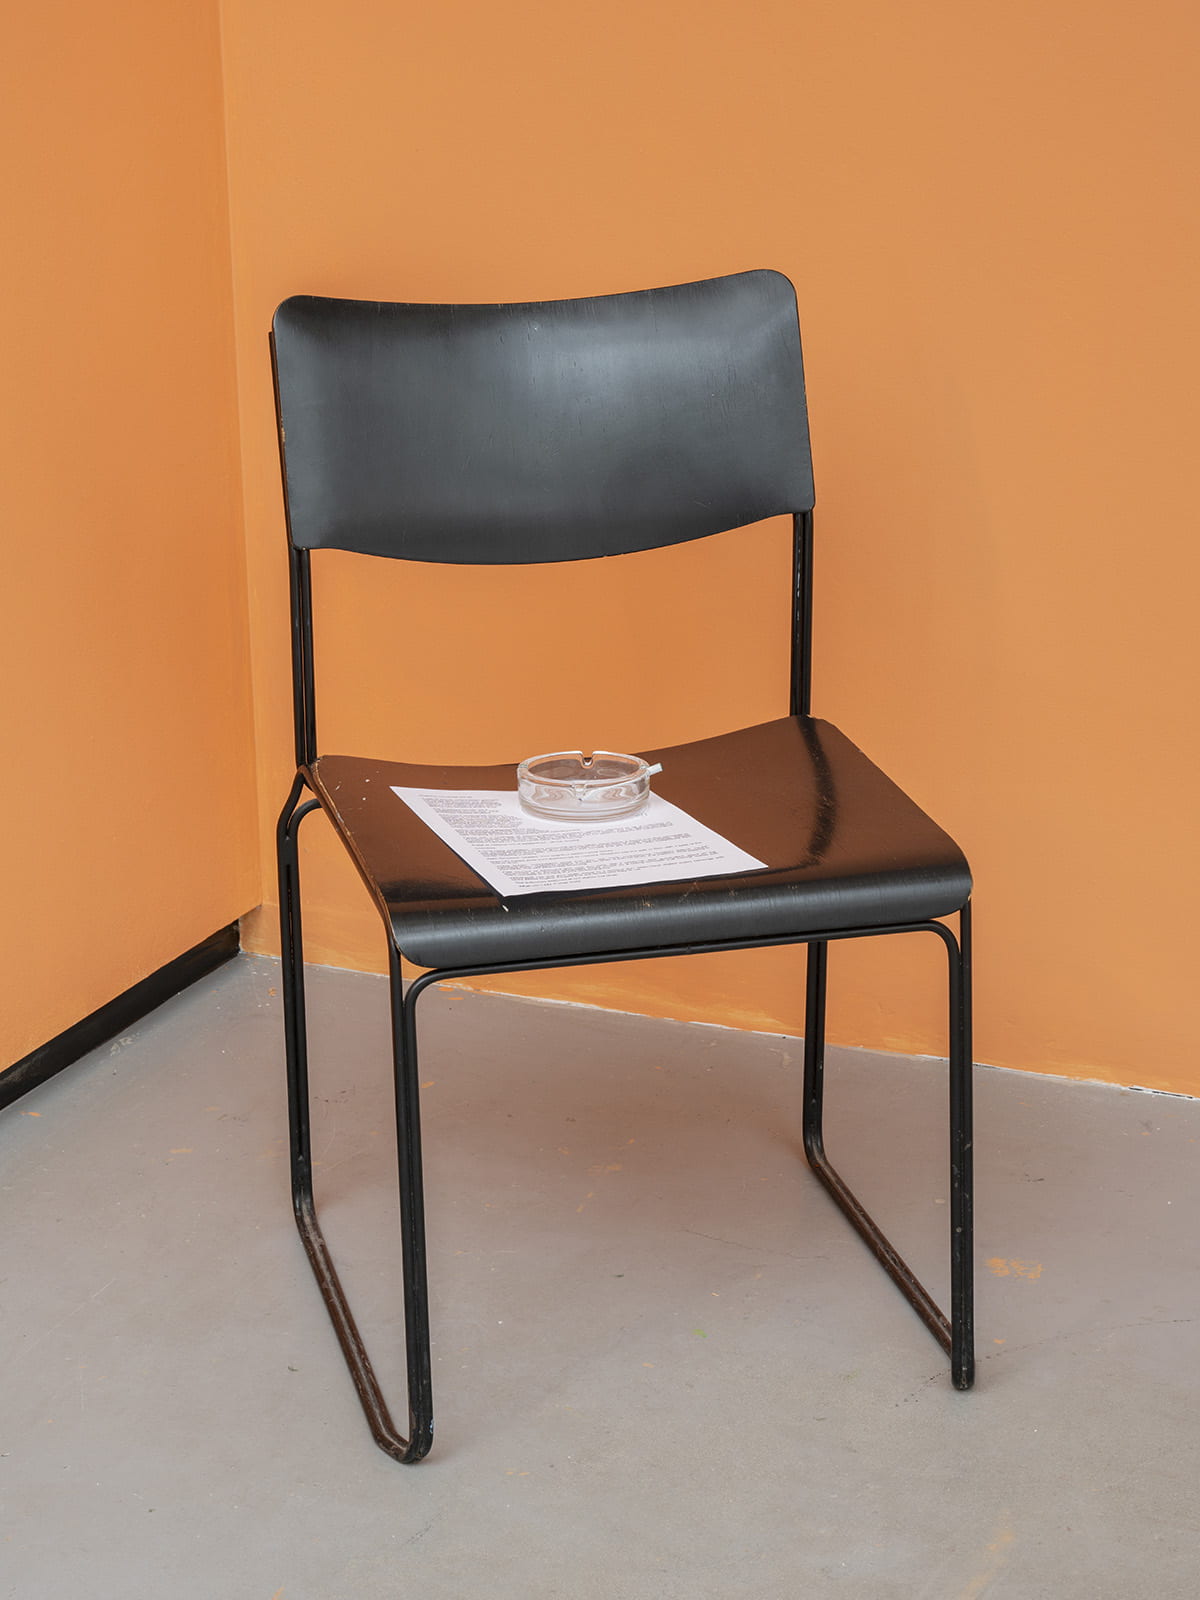 An image of a chair upholding a piece of typed paper, an ashtray and a cigarette.